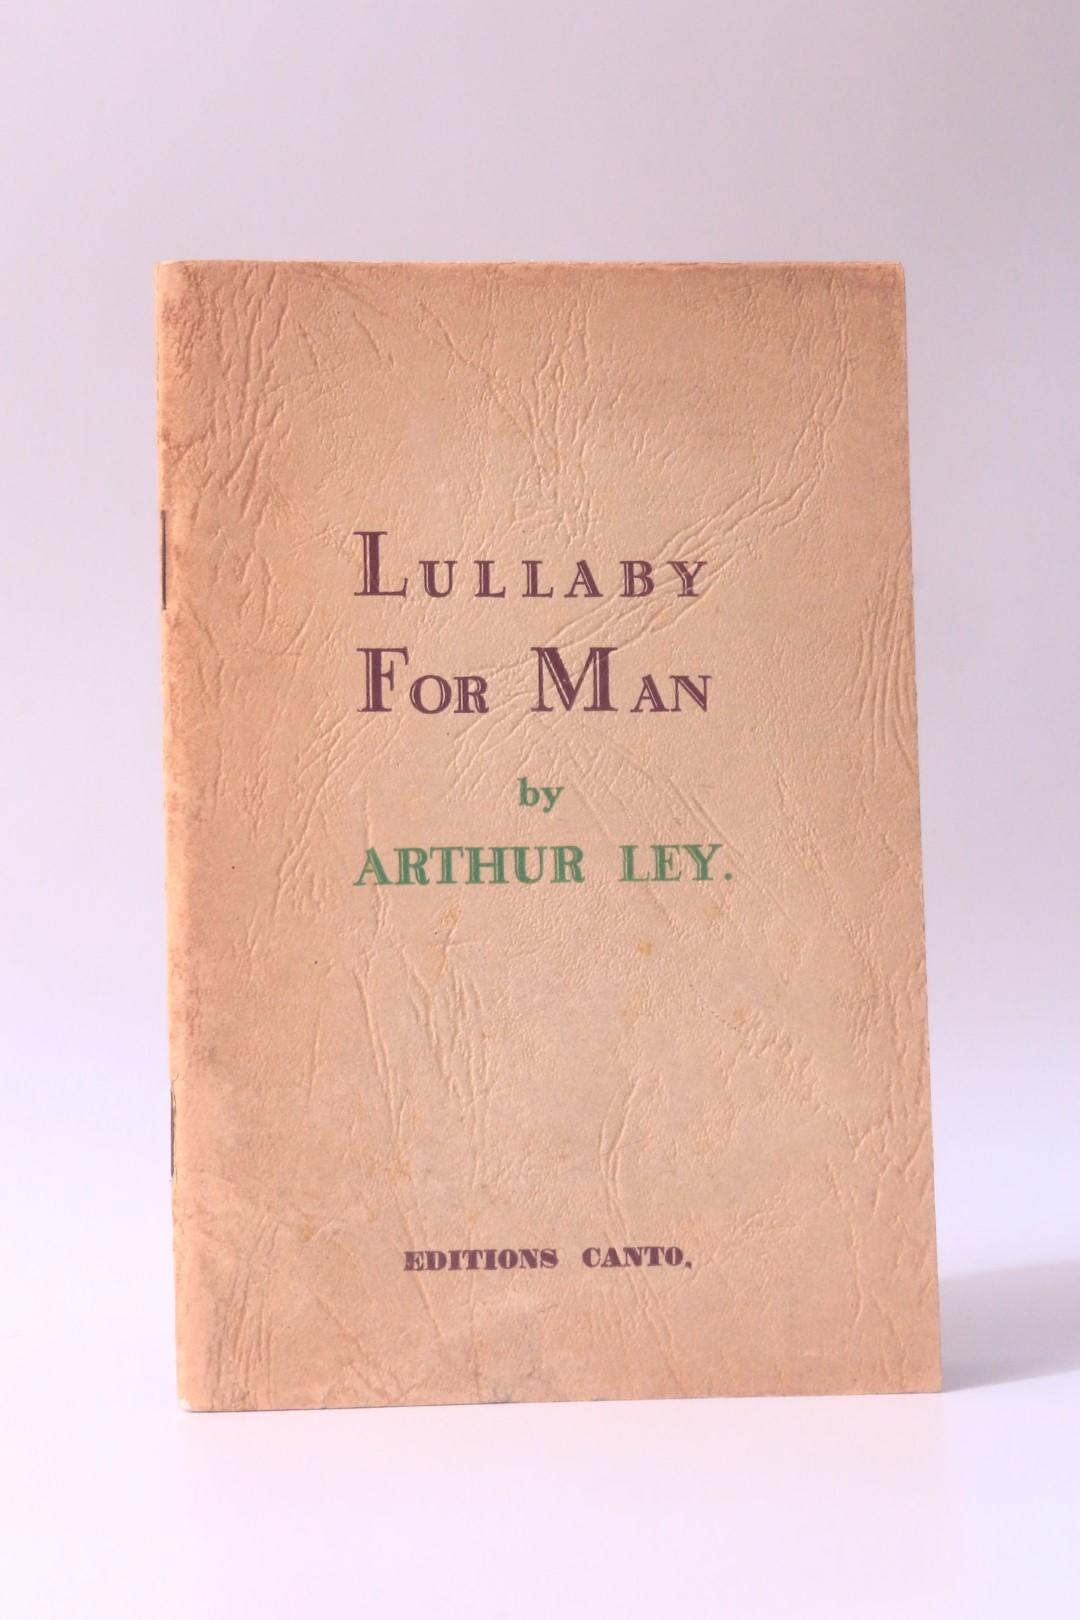 Arthur Ley - Lullaby for Man - Editions Canto, n.d. [1951?], First Edition.